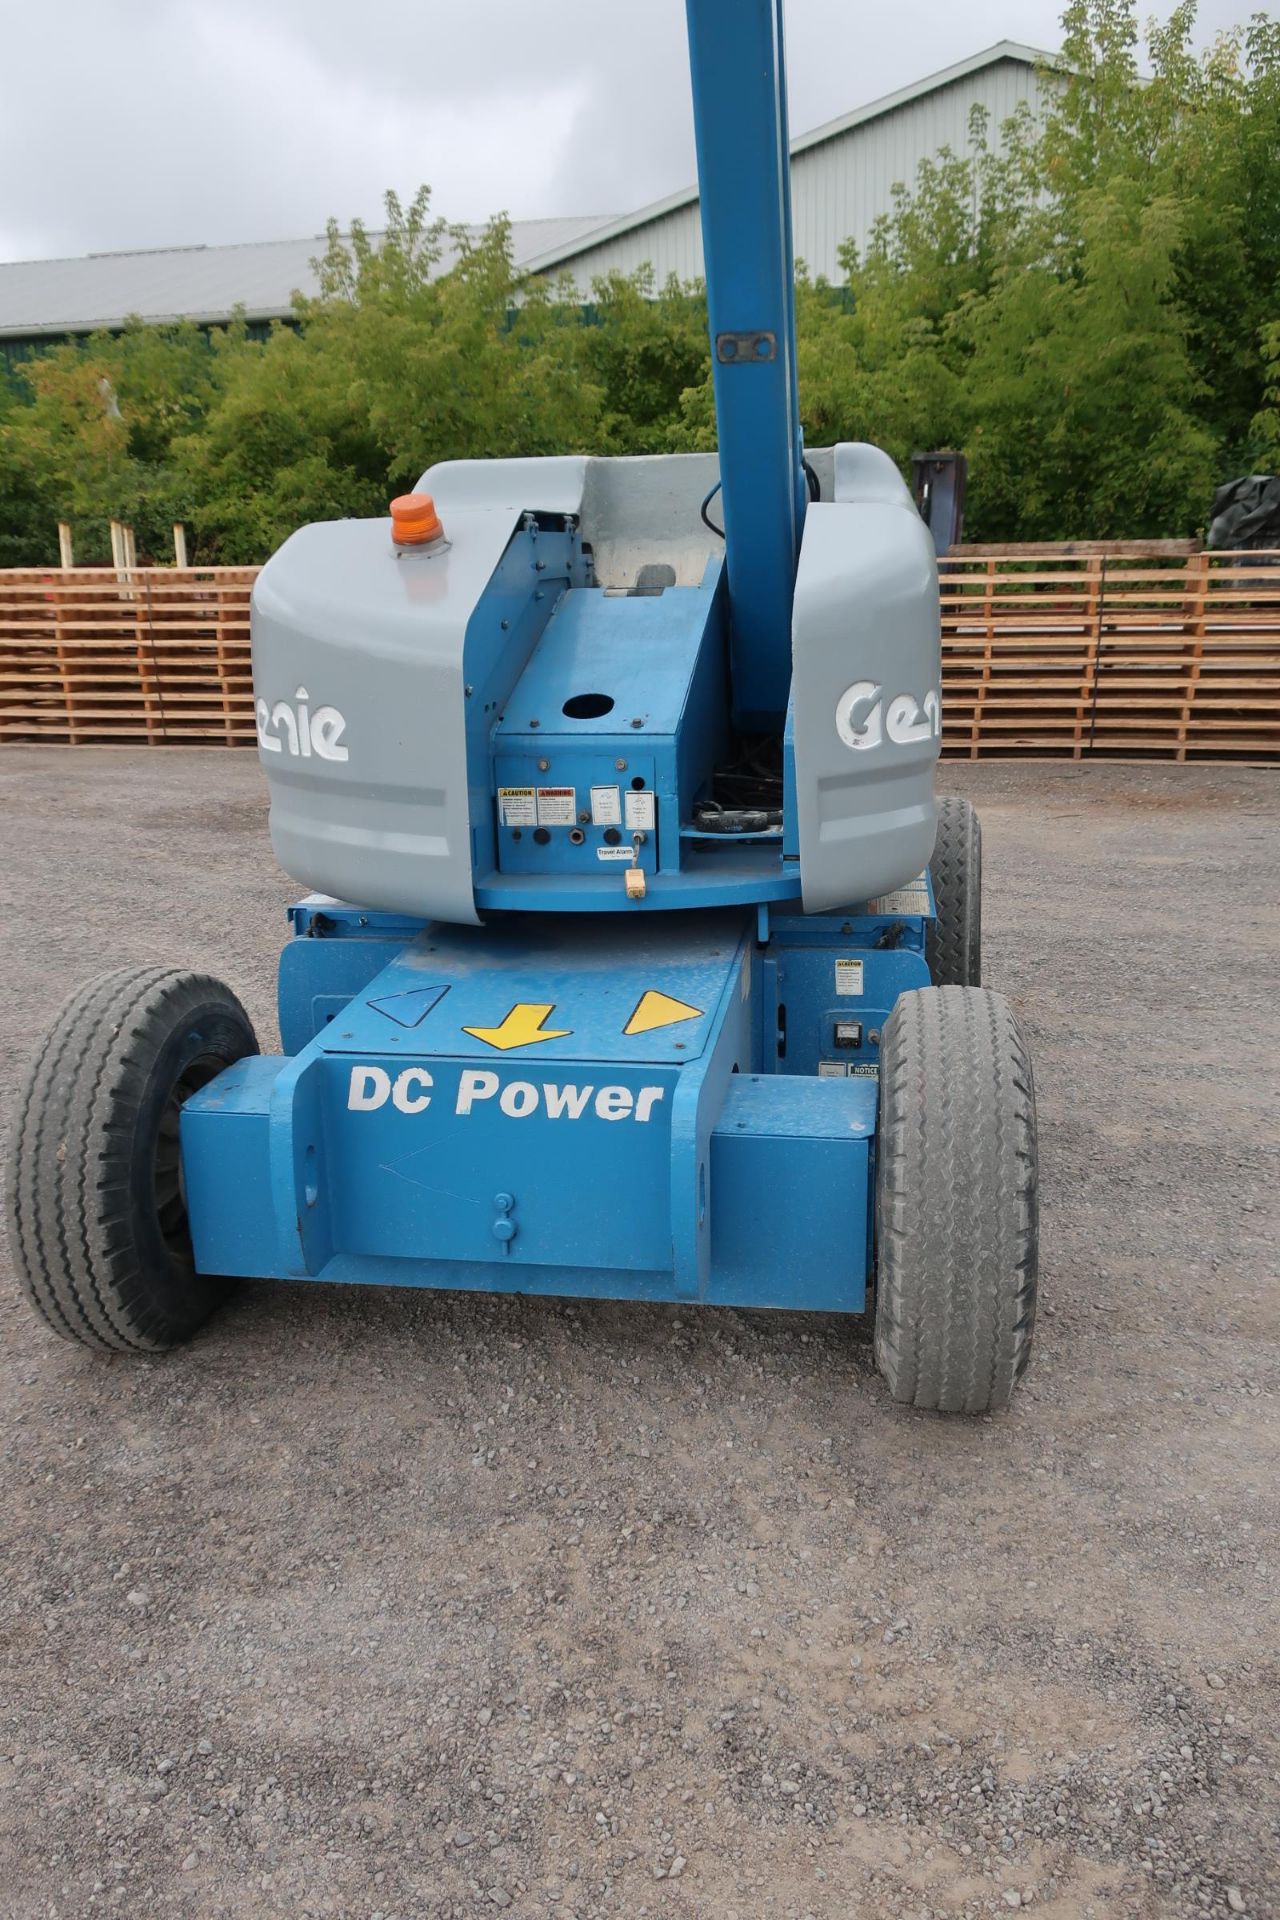 FREE CUSTOMS - MINT Genie Zoom Boom Articulating Lift model Z-45/25 45' height Electric LOW HOURS - Image 4 of 4